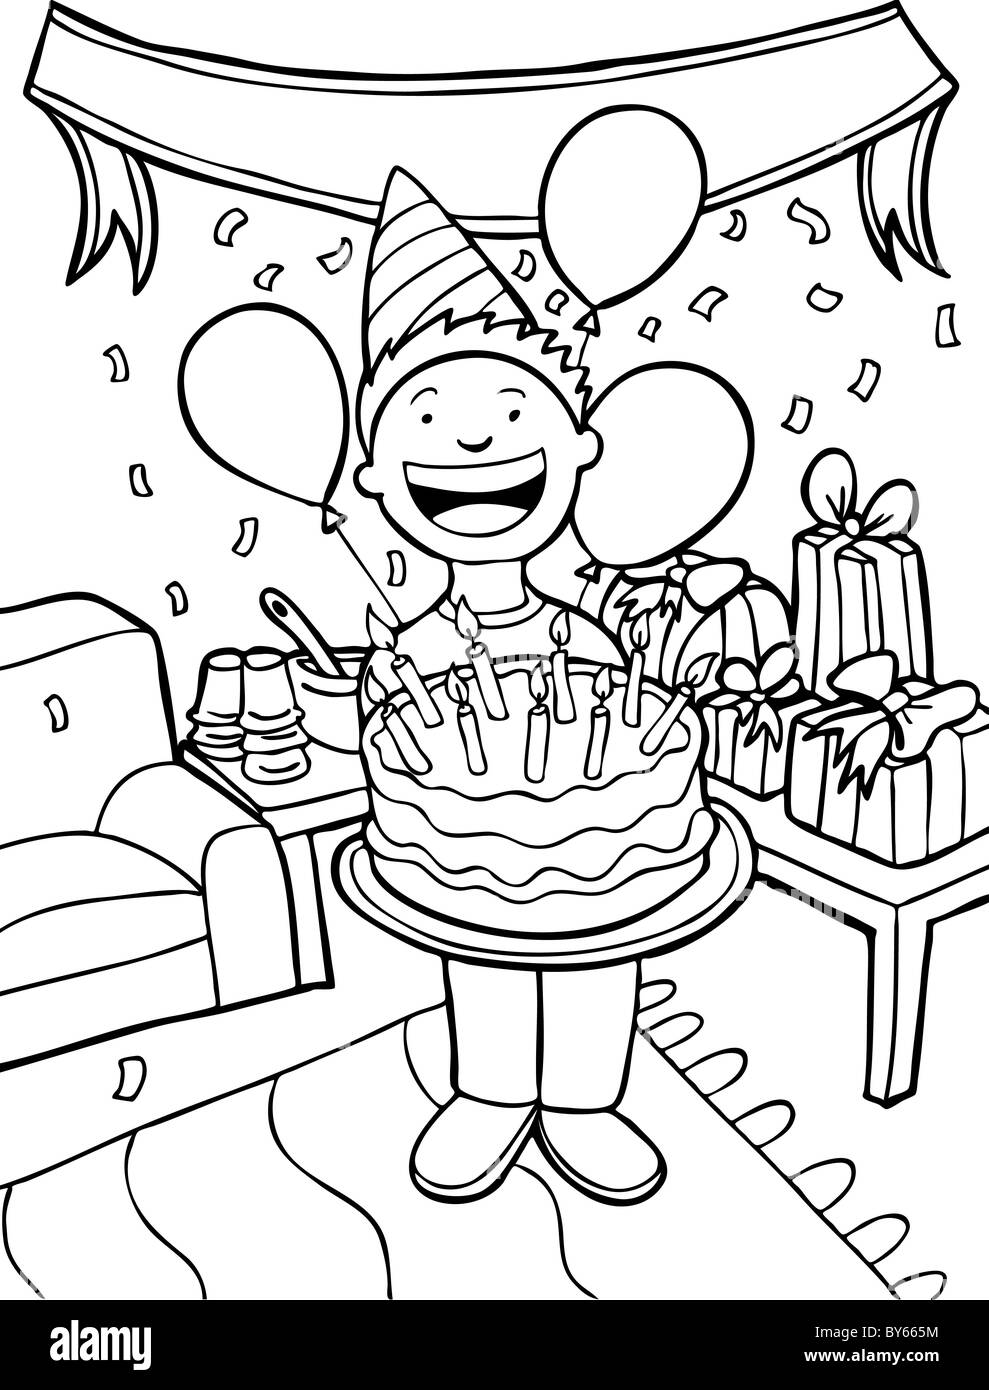 Child celebrates his birthday with a party - black and white Stock Photo - Alamy